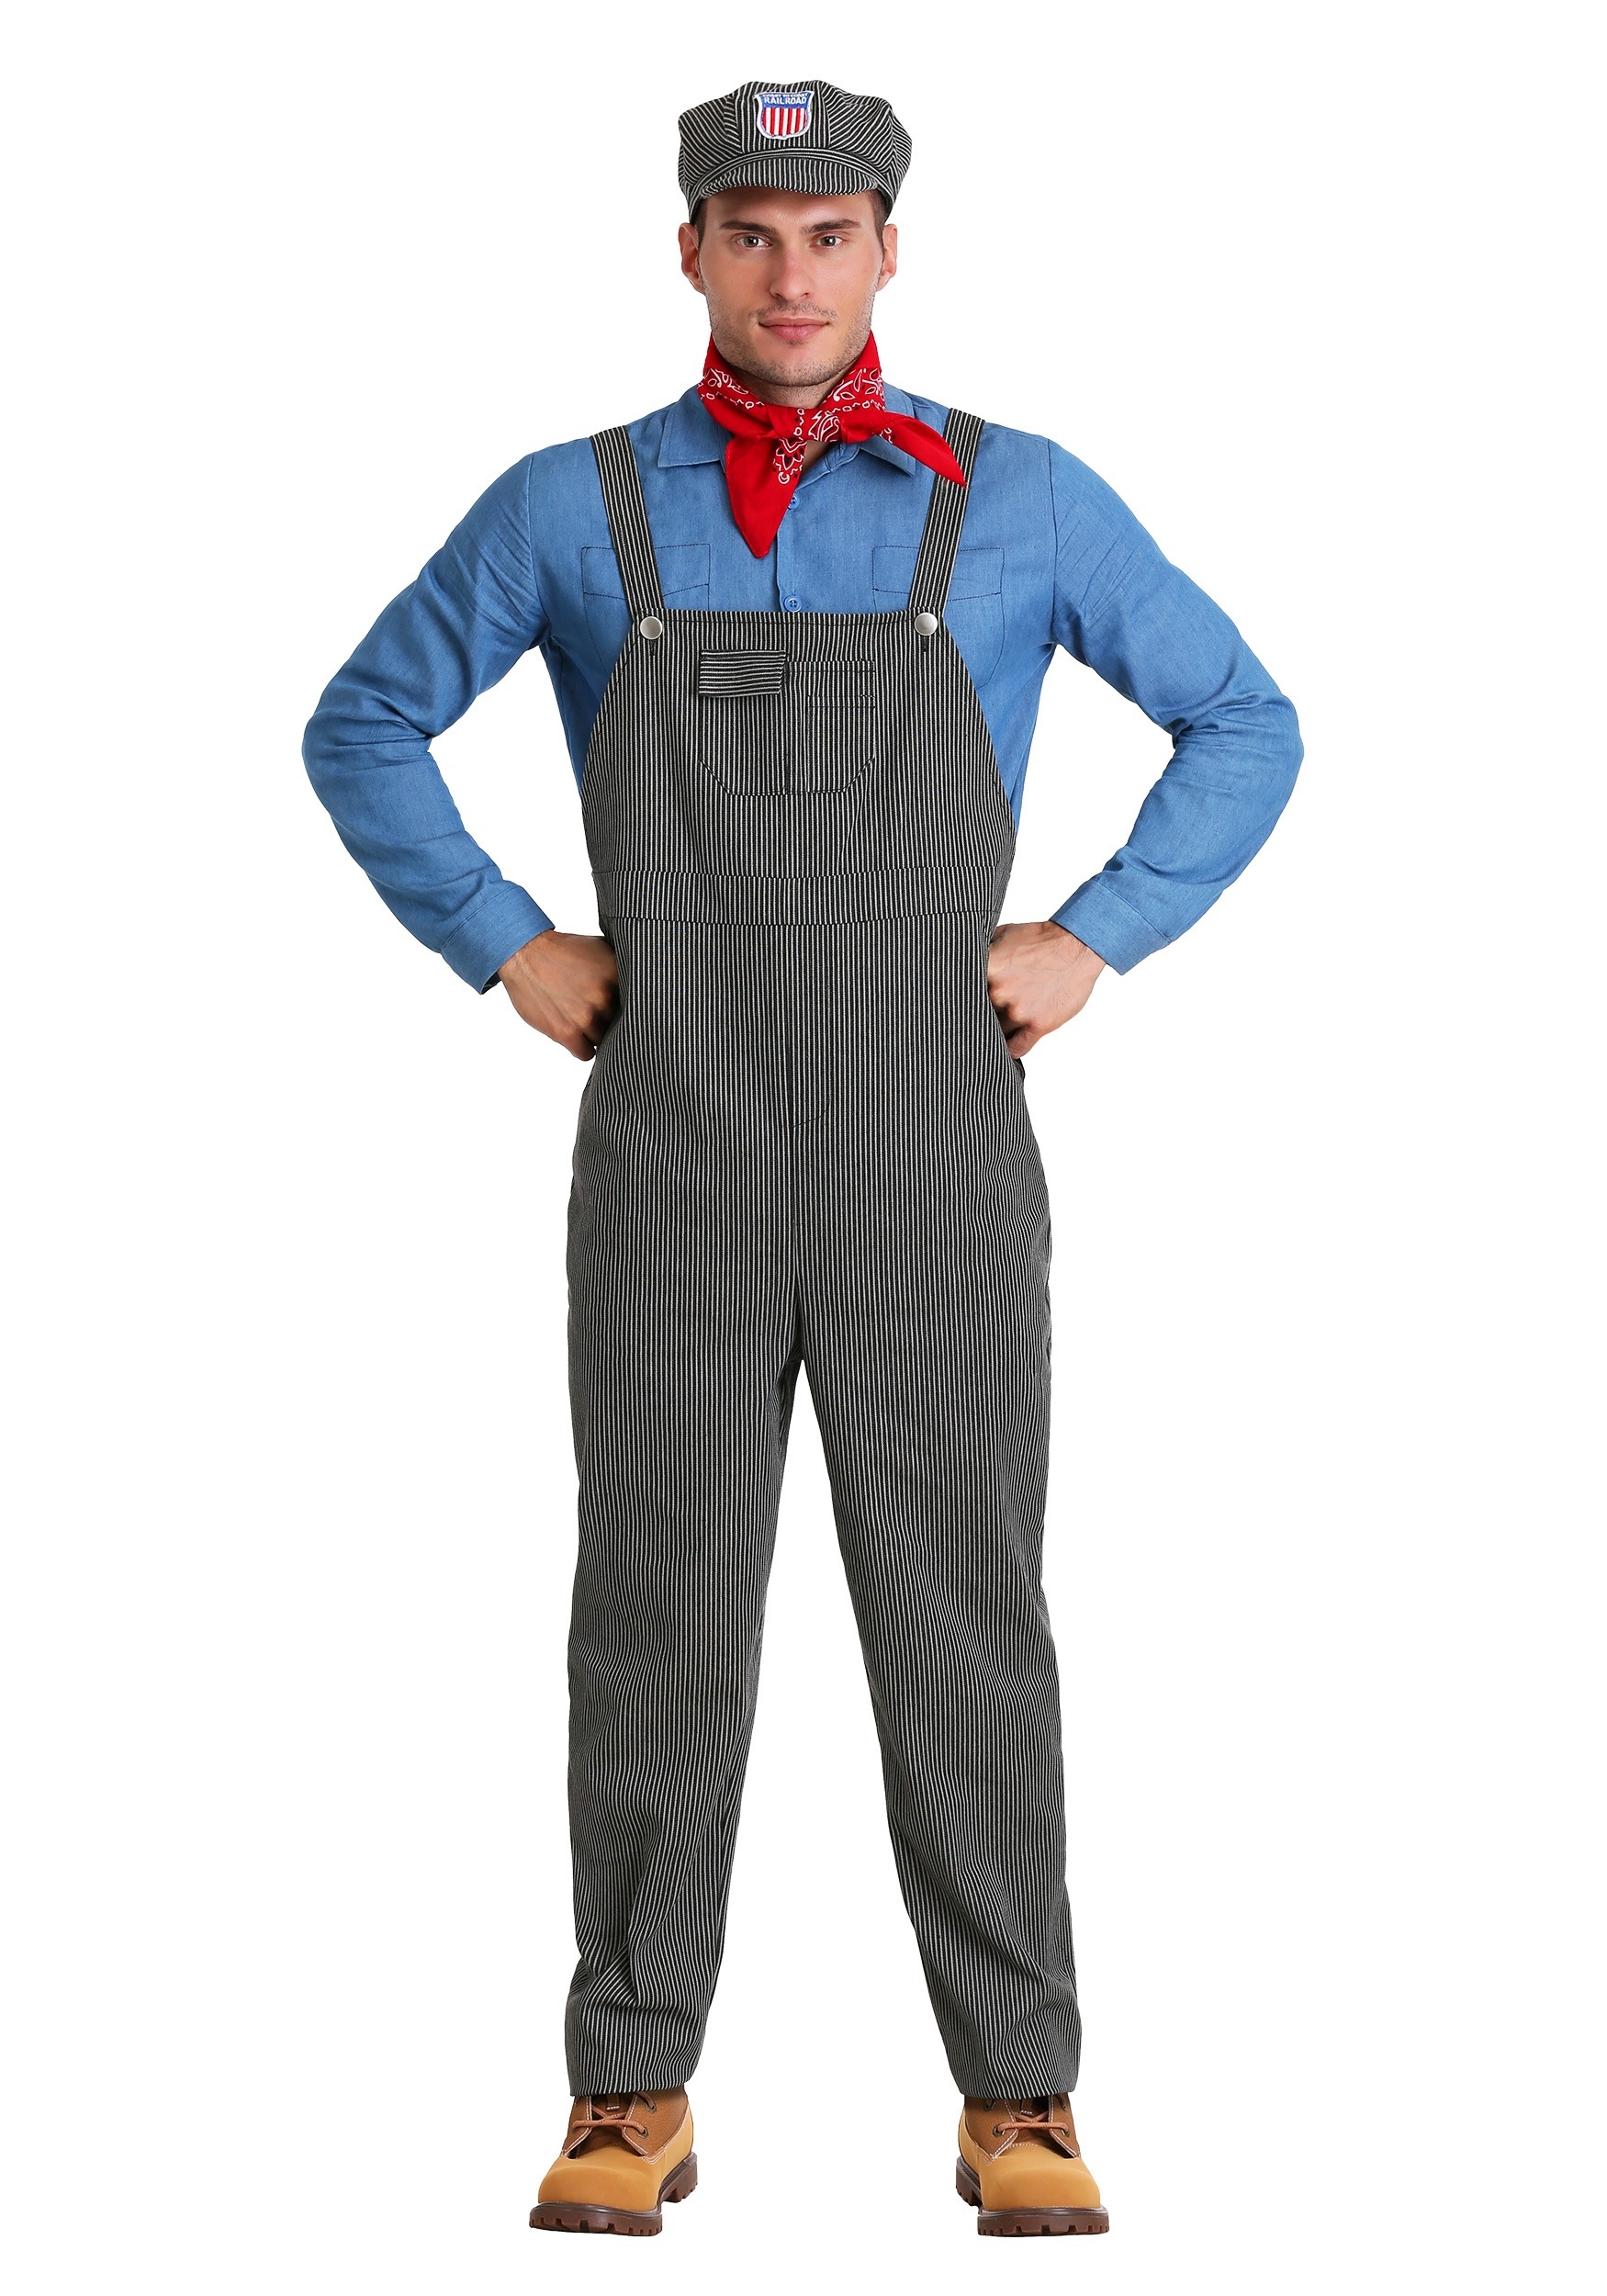 Train Engineer Costume For Adults